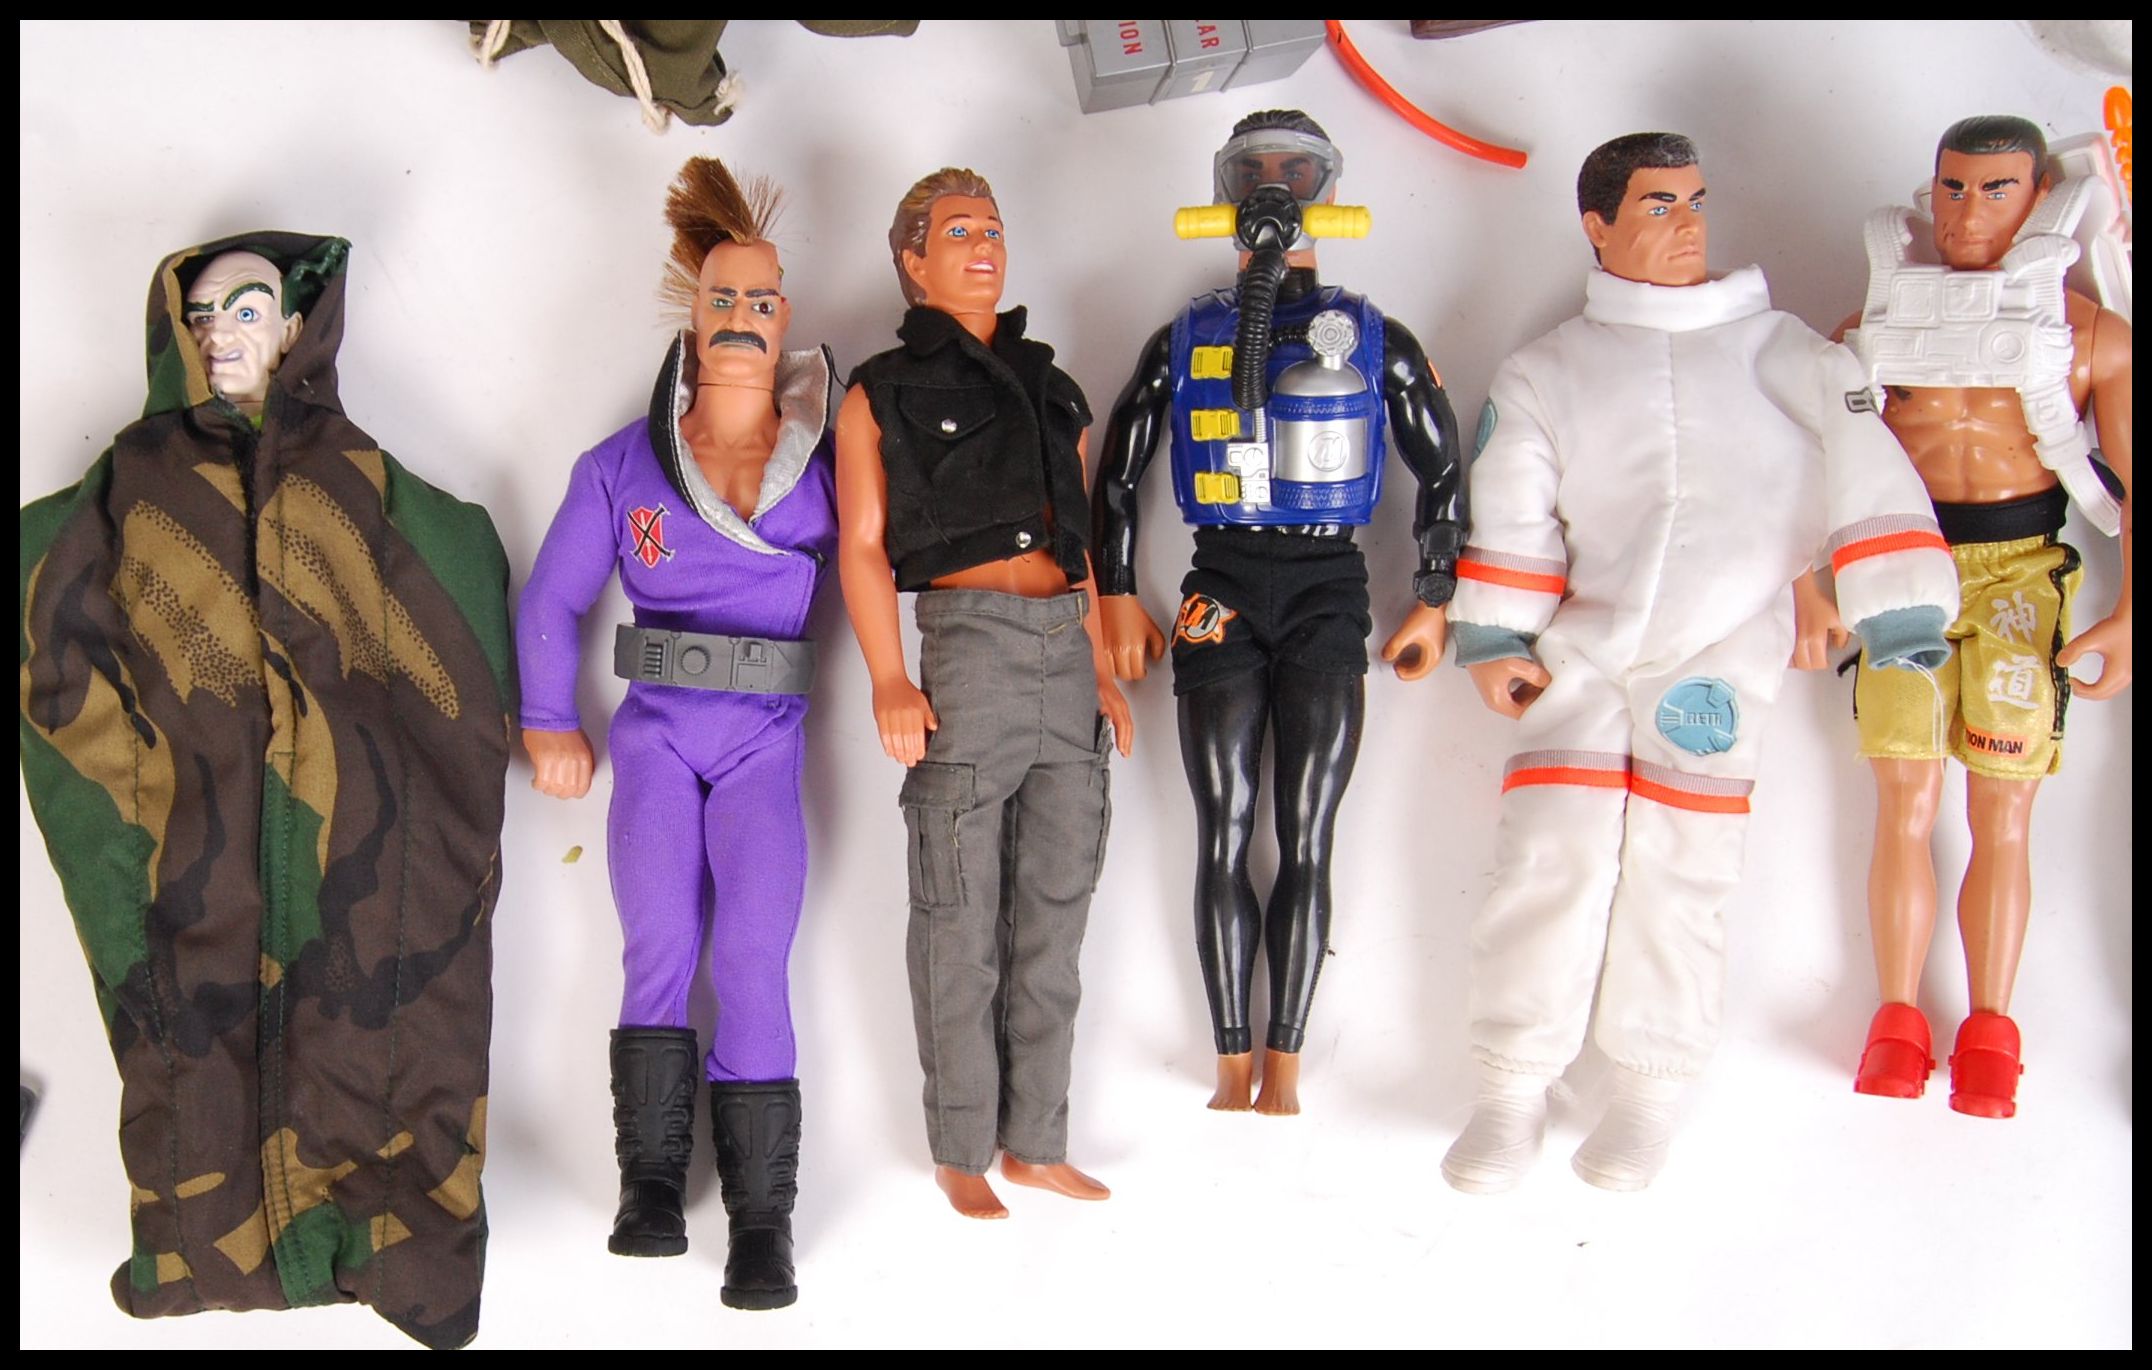 HASBRO ACTION MAN & ACCESSORIES - Image 3 of 6